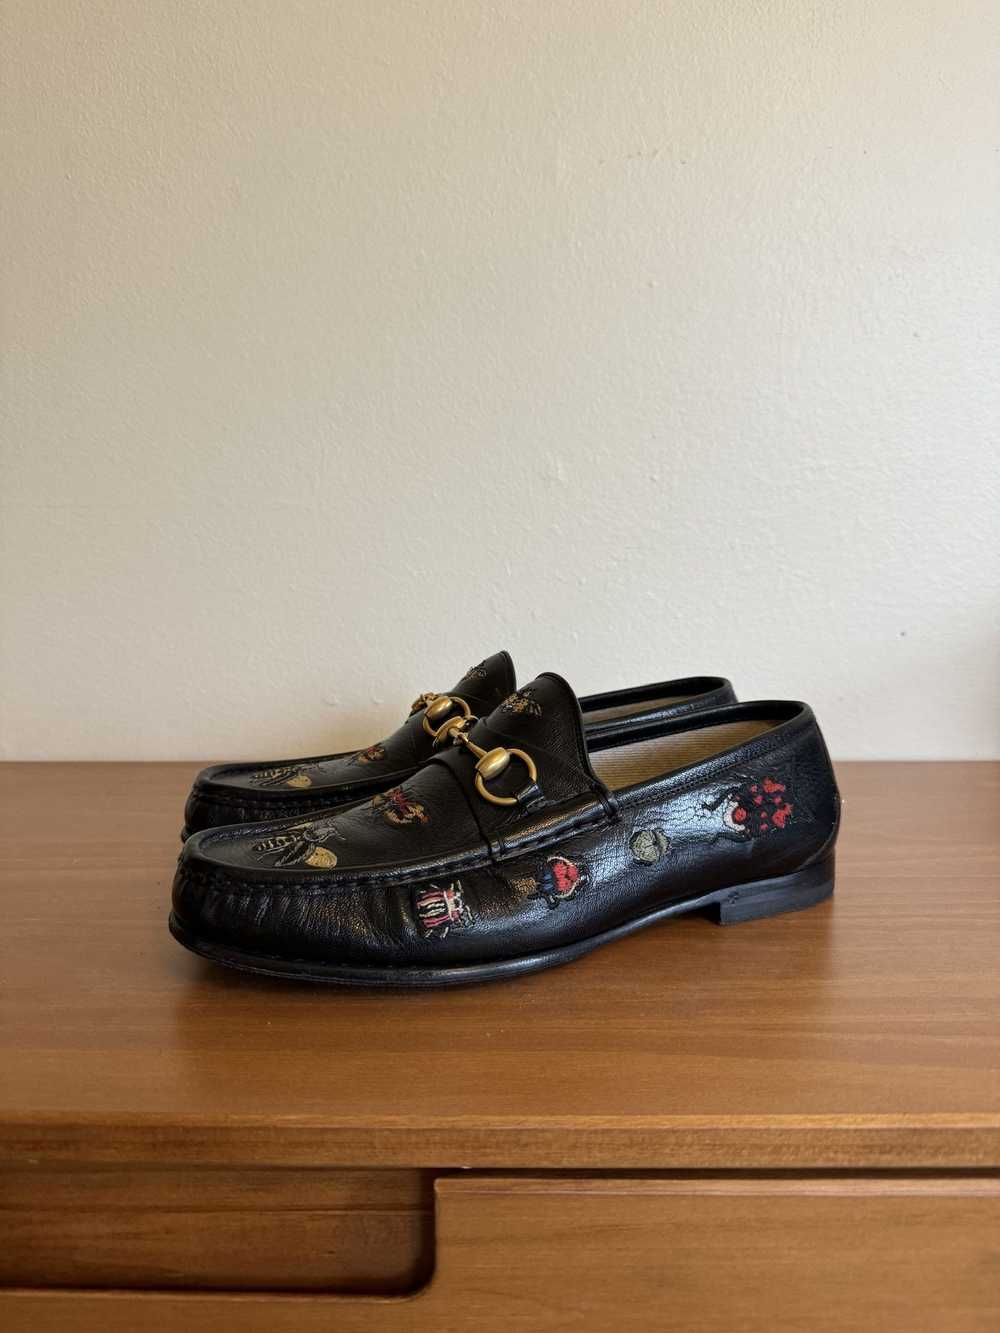 Gucci 1953 Embroidered Horsebit Loafers - image 2